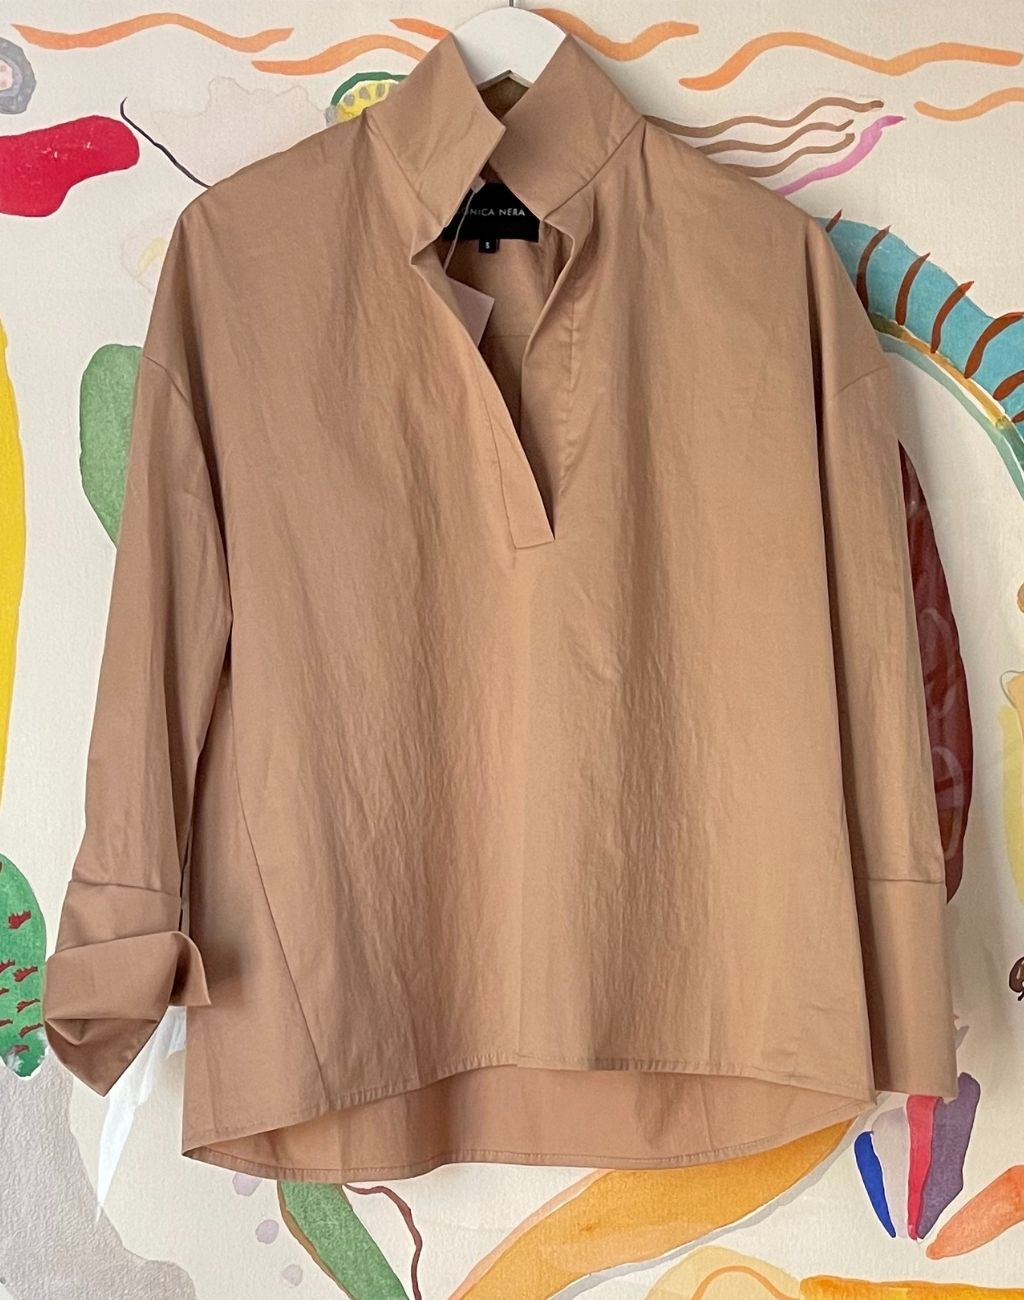 Classic Cotton Poplin Grace Shirt in Beige - V-Neck with Collar | Statement Cuffs with Buttons - Visit Nifty Monica Nera 